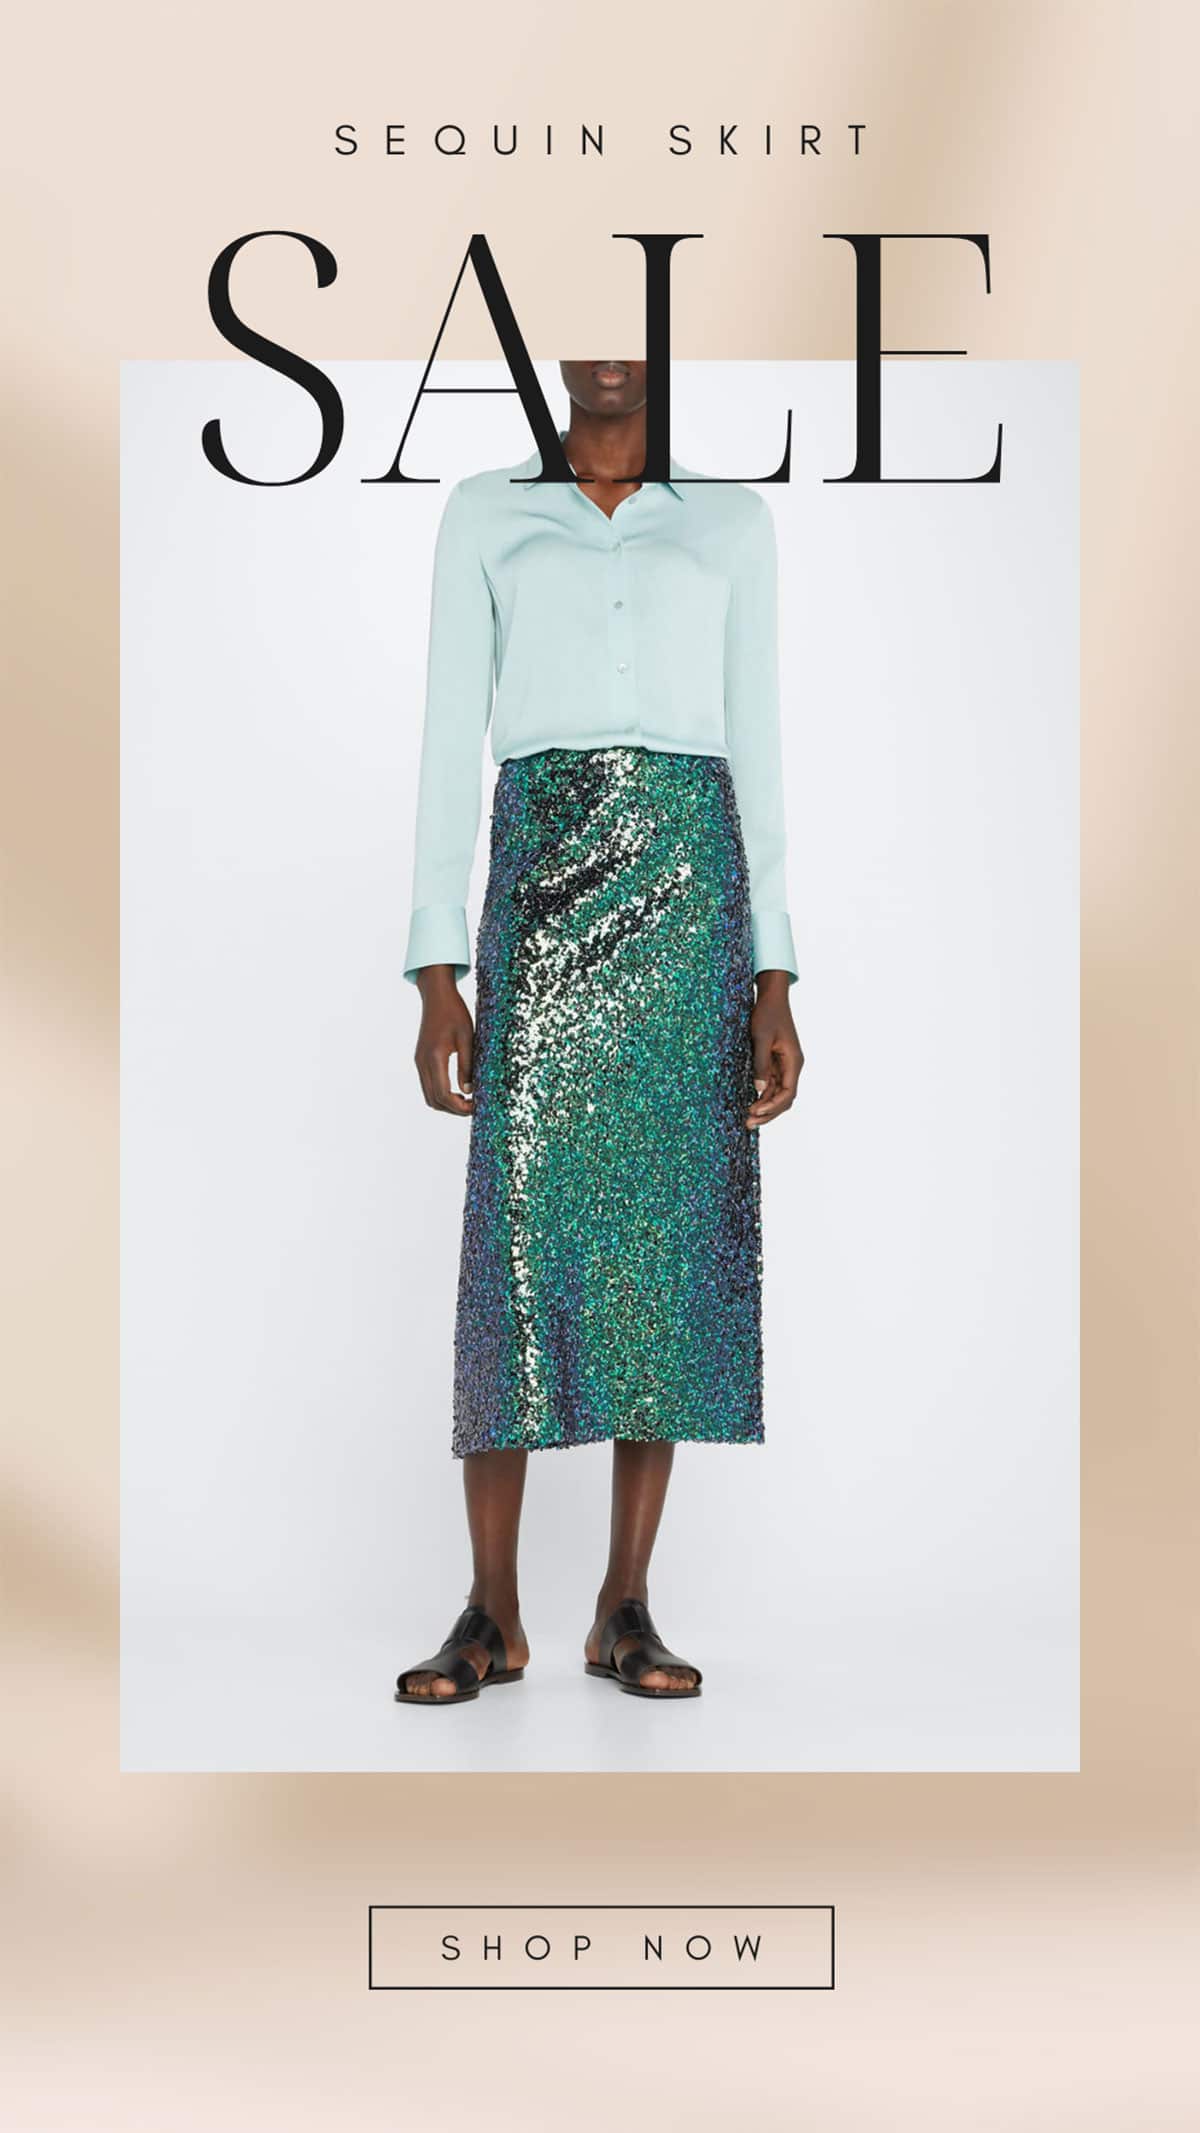 sequin skirt perfect for the holidays